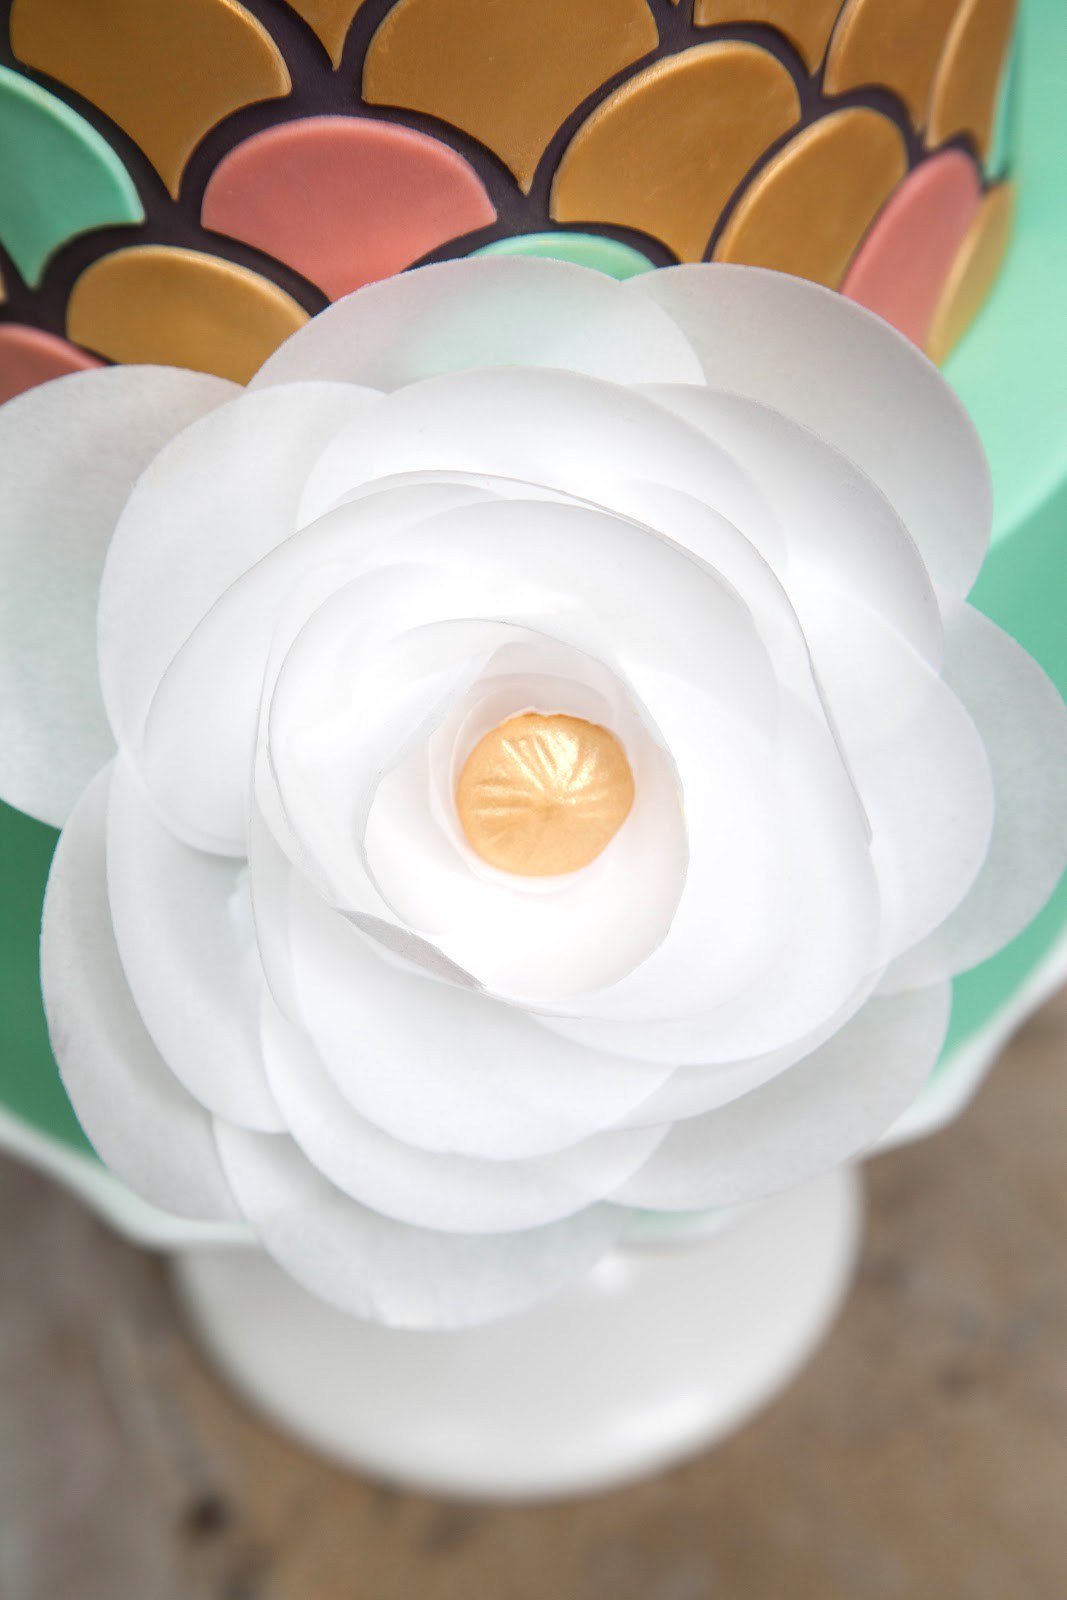 Edible Wafer Paper Flower Designs for Cakes